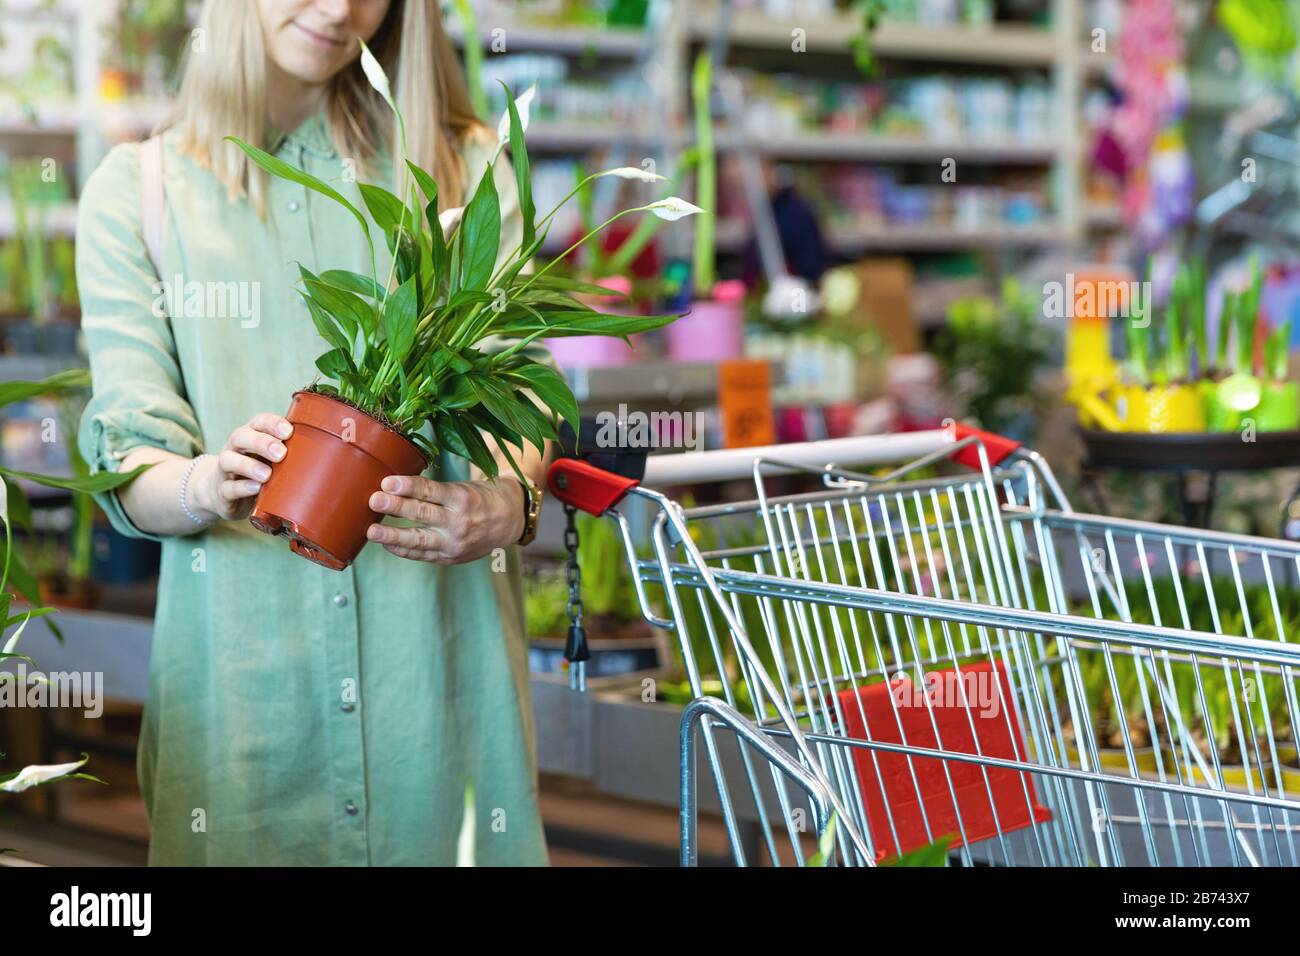 woman pick potted spathiphyllum flower for her home at indoor plant store Stock Photo